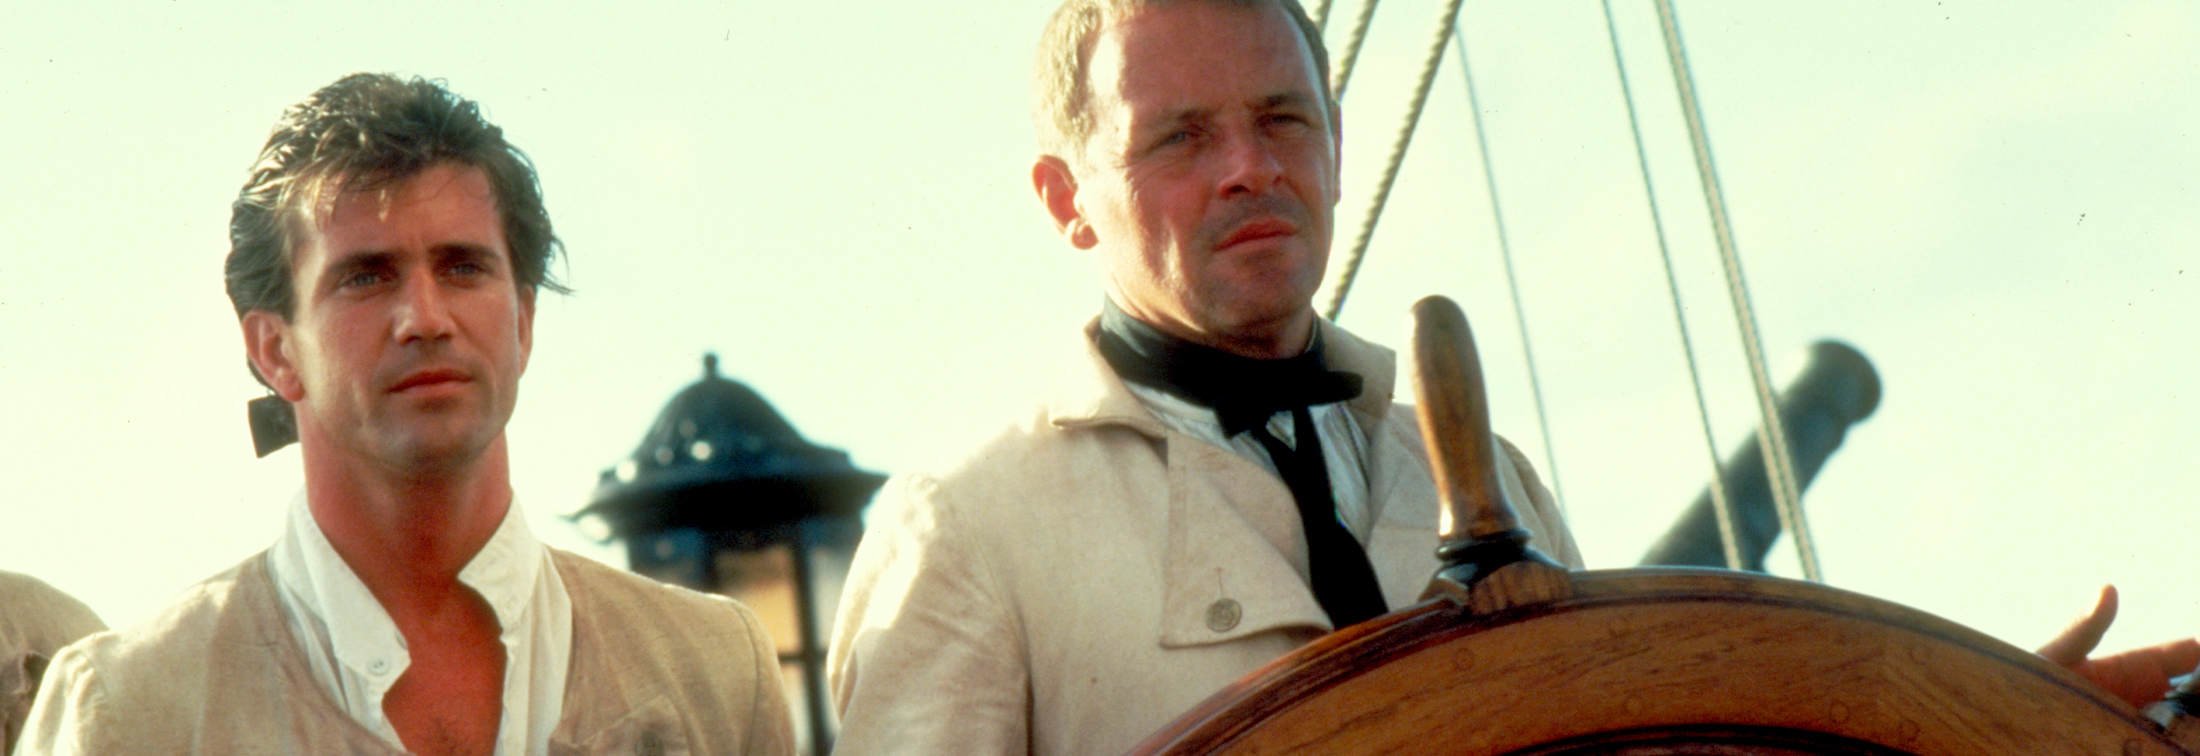 The Bounty - Anthony Hopkins and Mel Gibson's adventures on the high seas